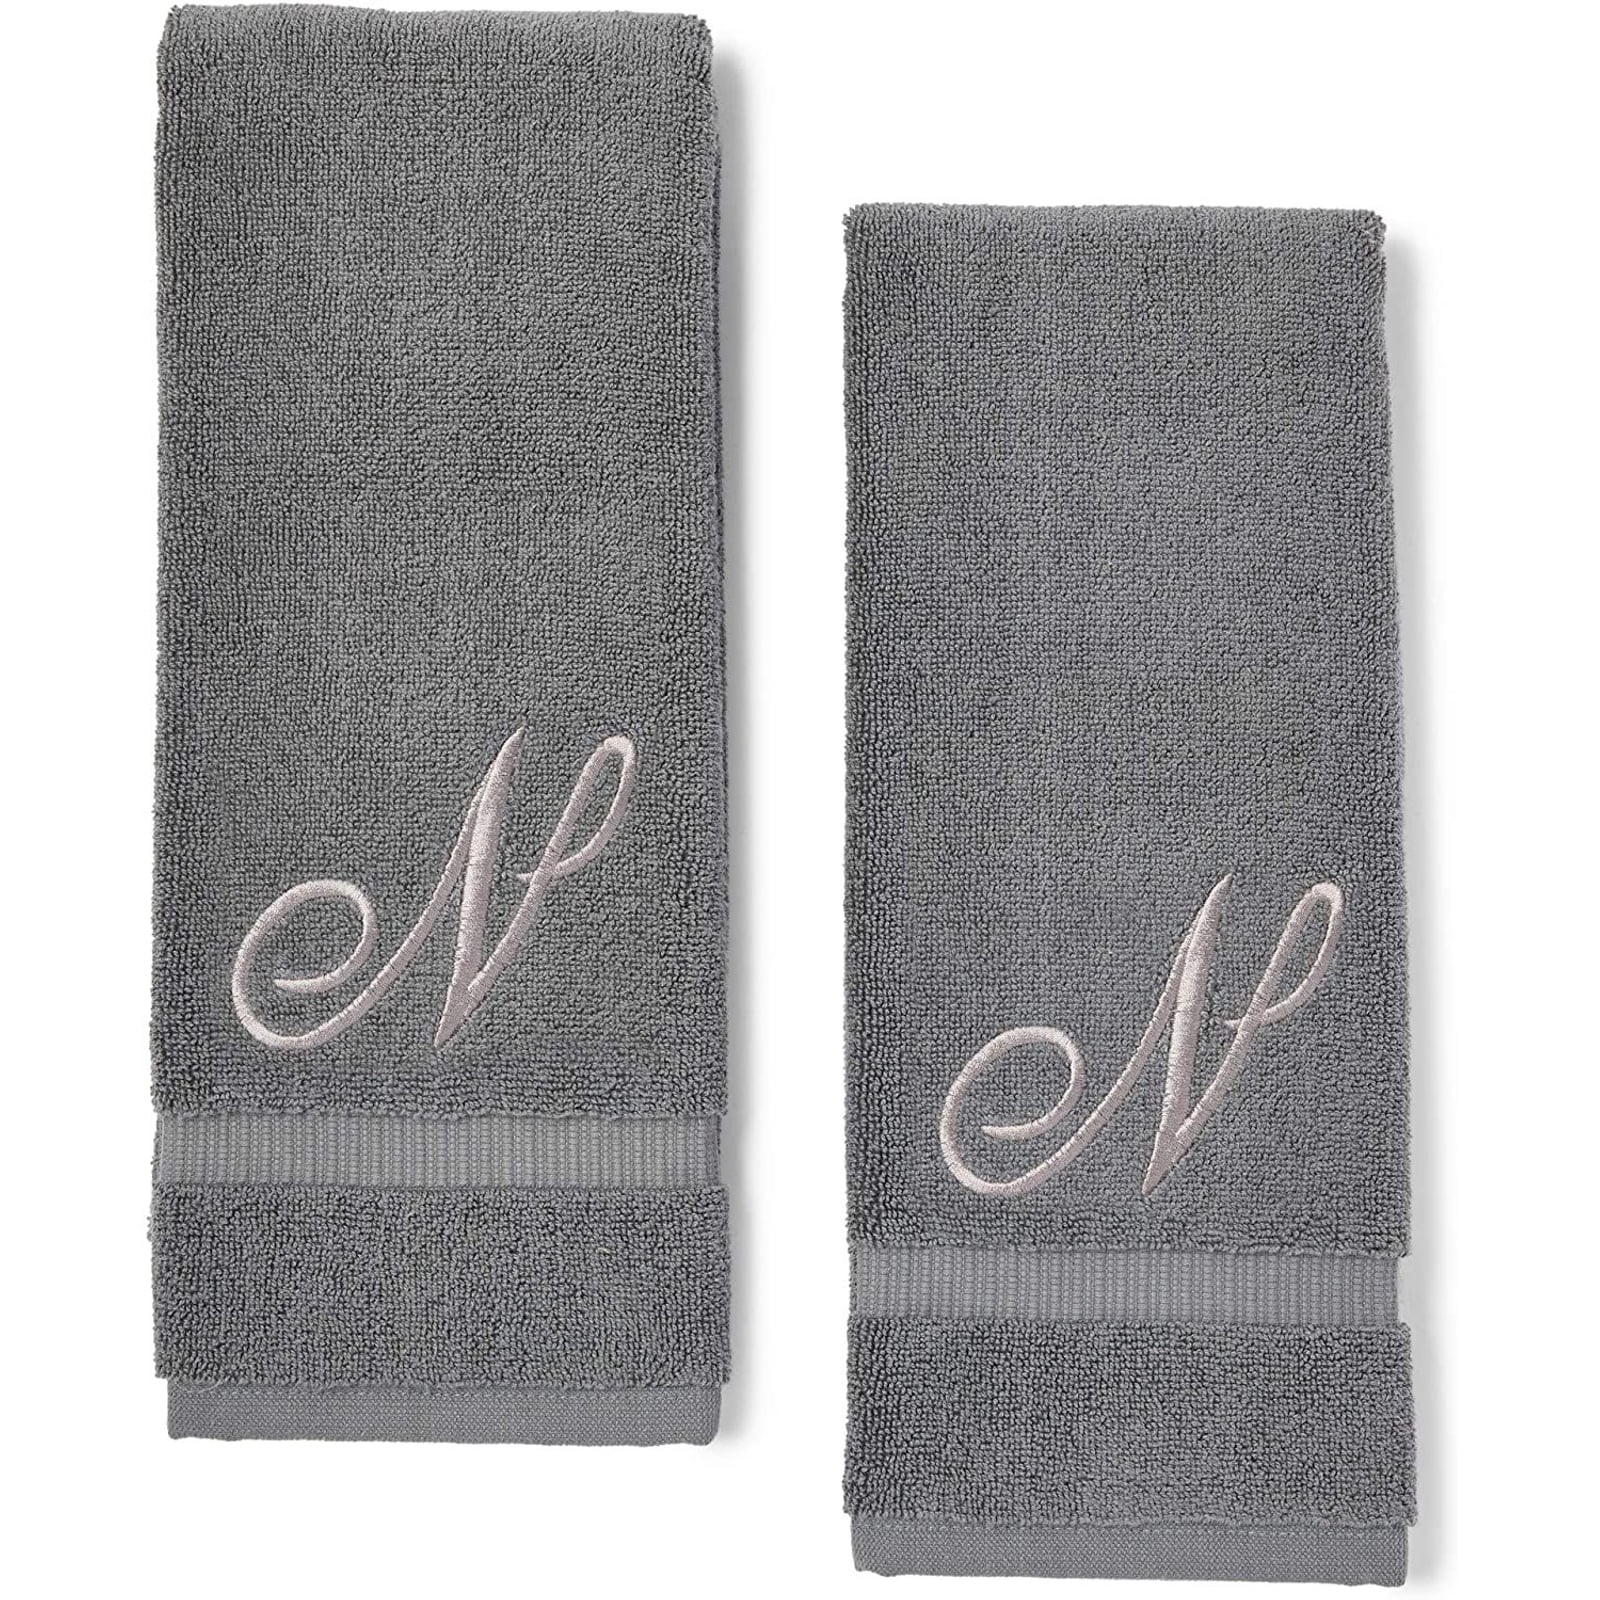 Hand Embroidered Monogrammed "E" Linen Hand/Guest Towel 2 pc set Free Shipping ! 